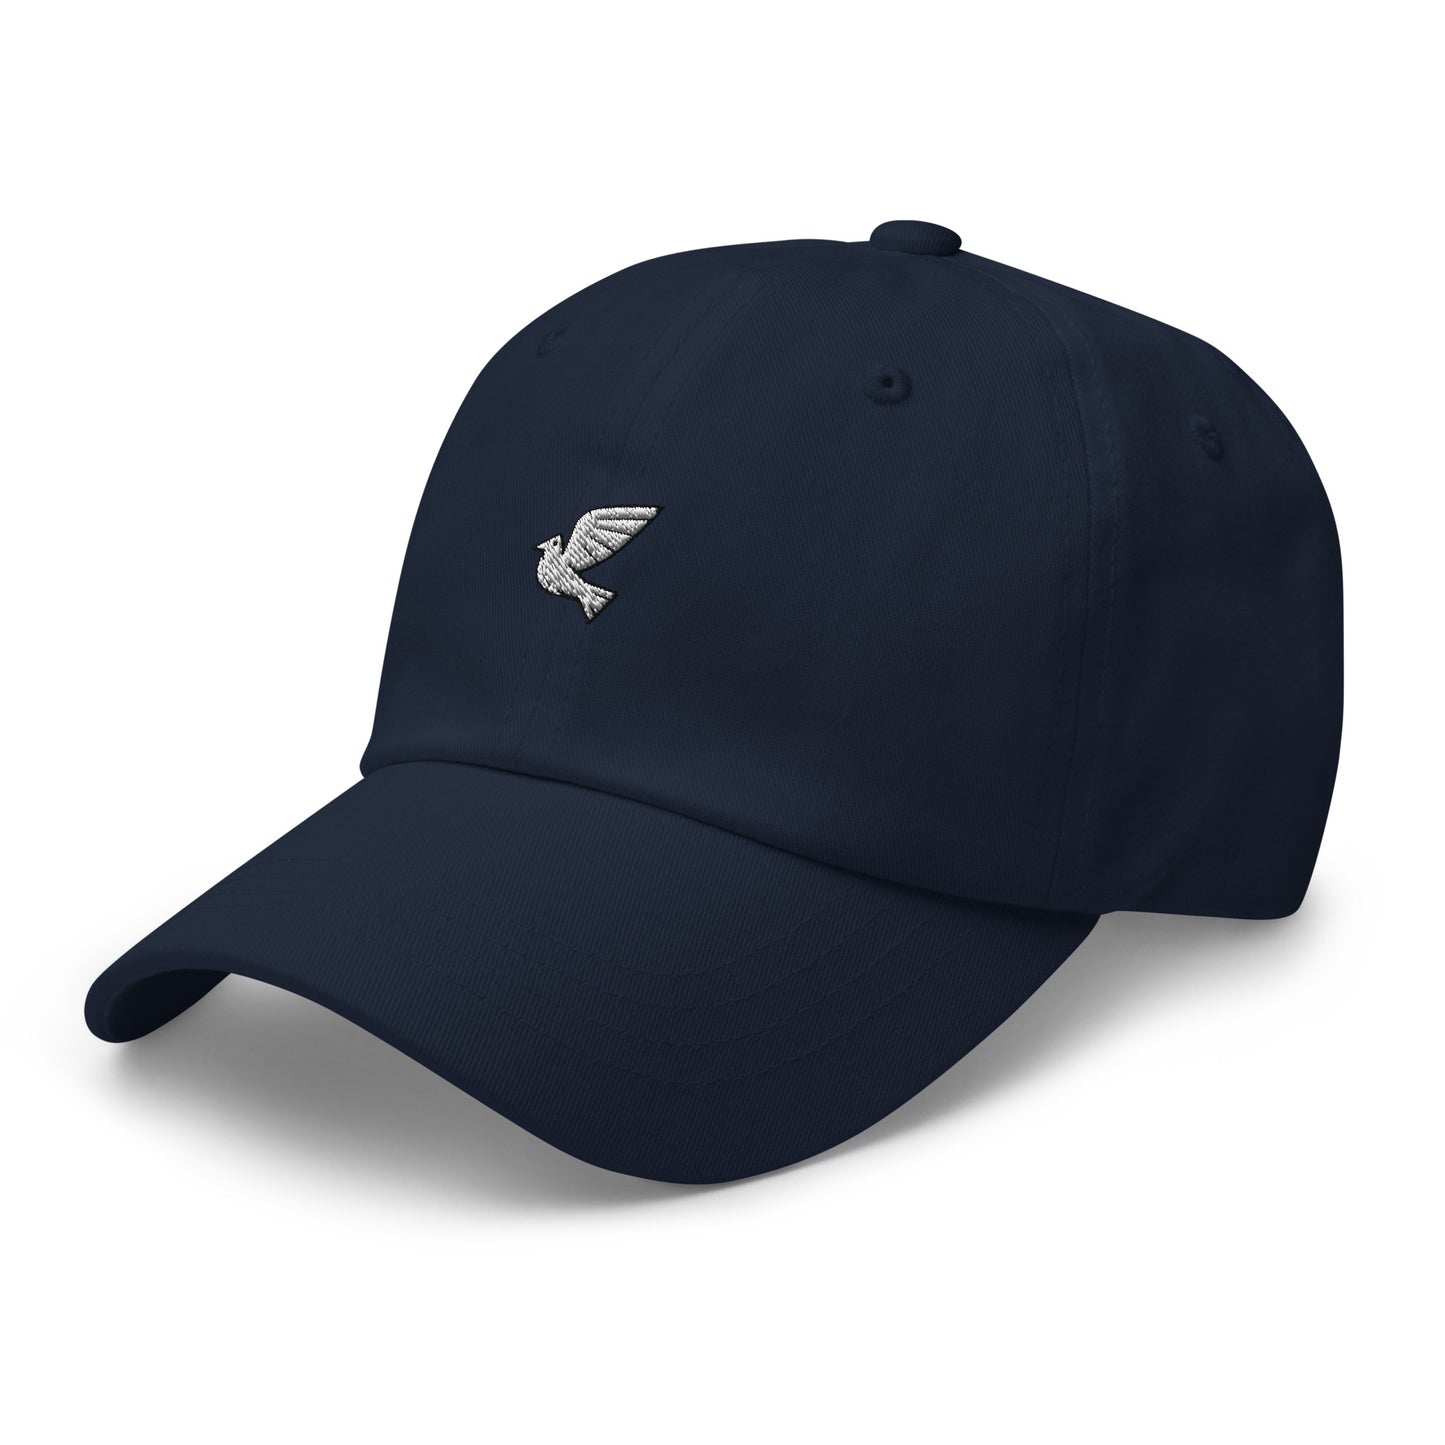 cap-from-the-front-with-holy spirit-symbol